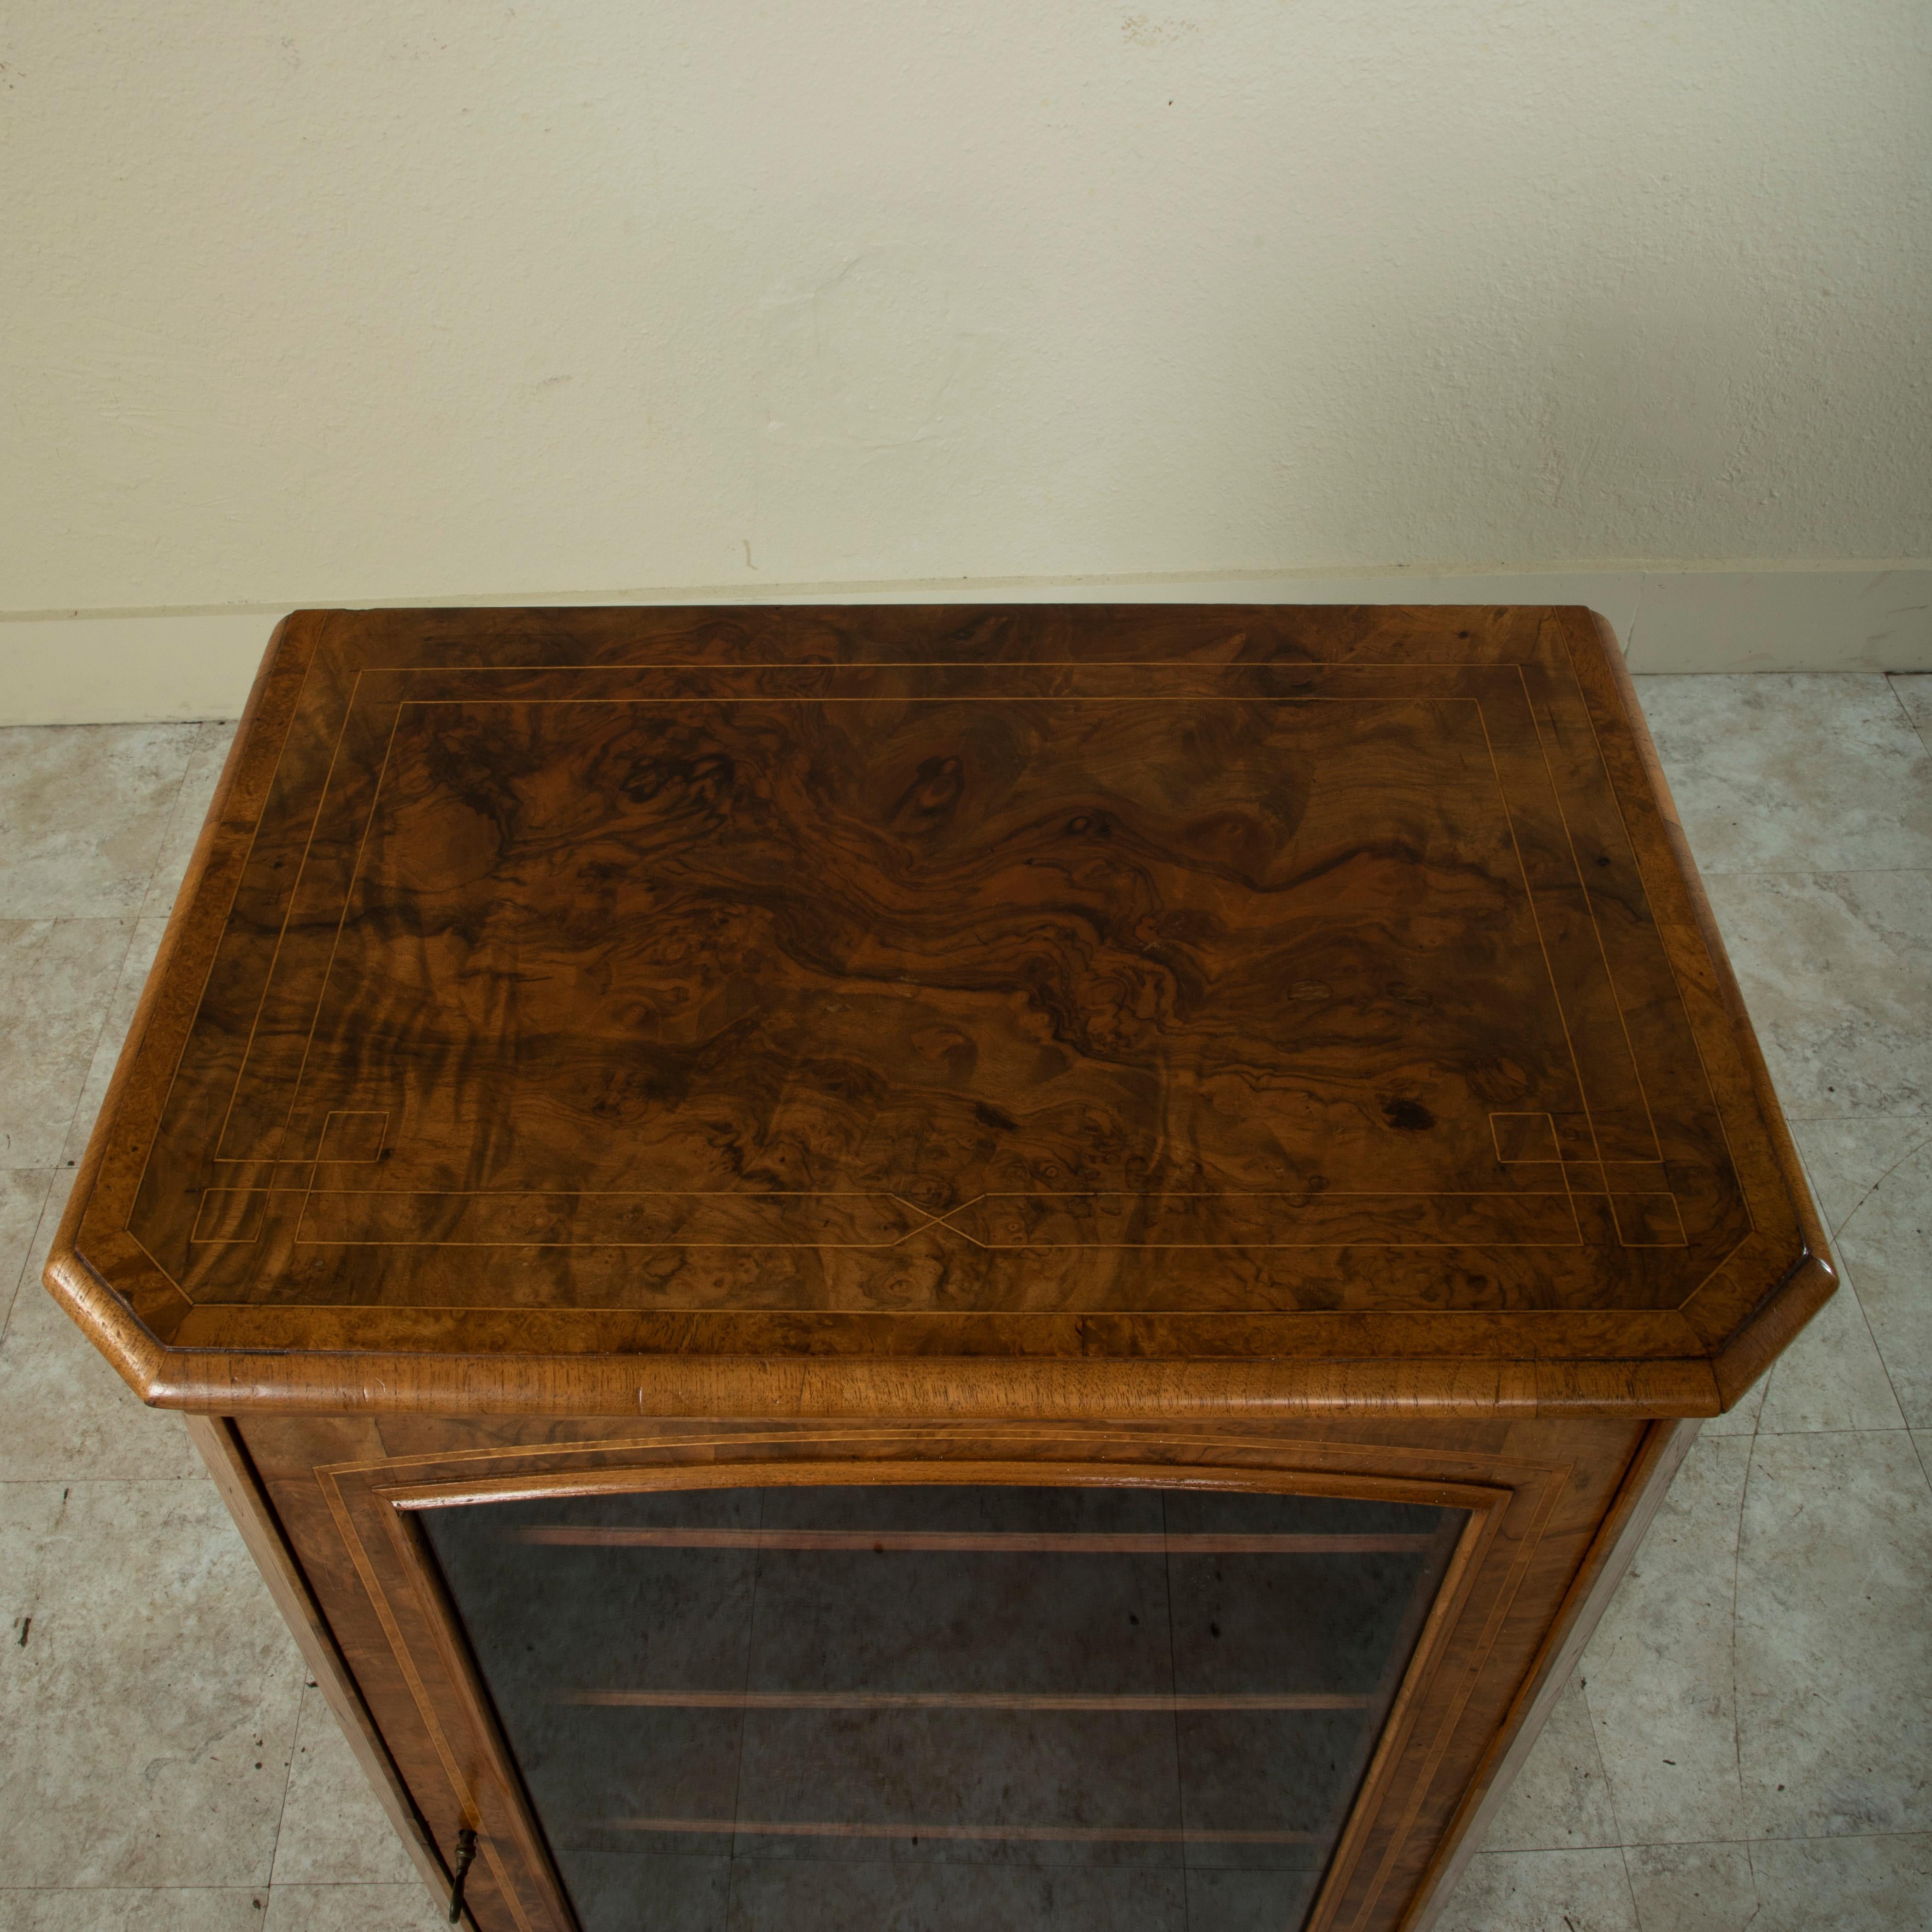 French Burl Walnut and Lemonwood Marquetry Vitrine or Cabinet, circa 1900 For Sale 1